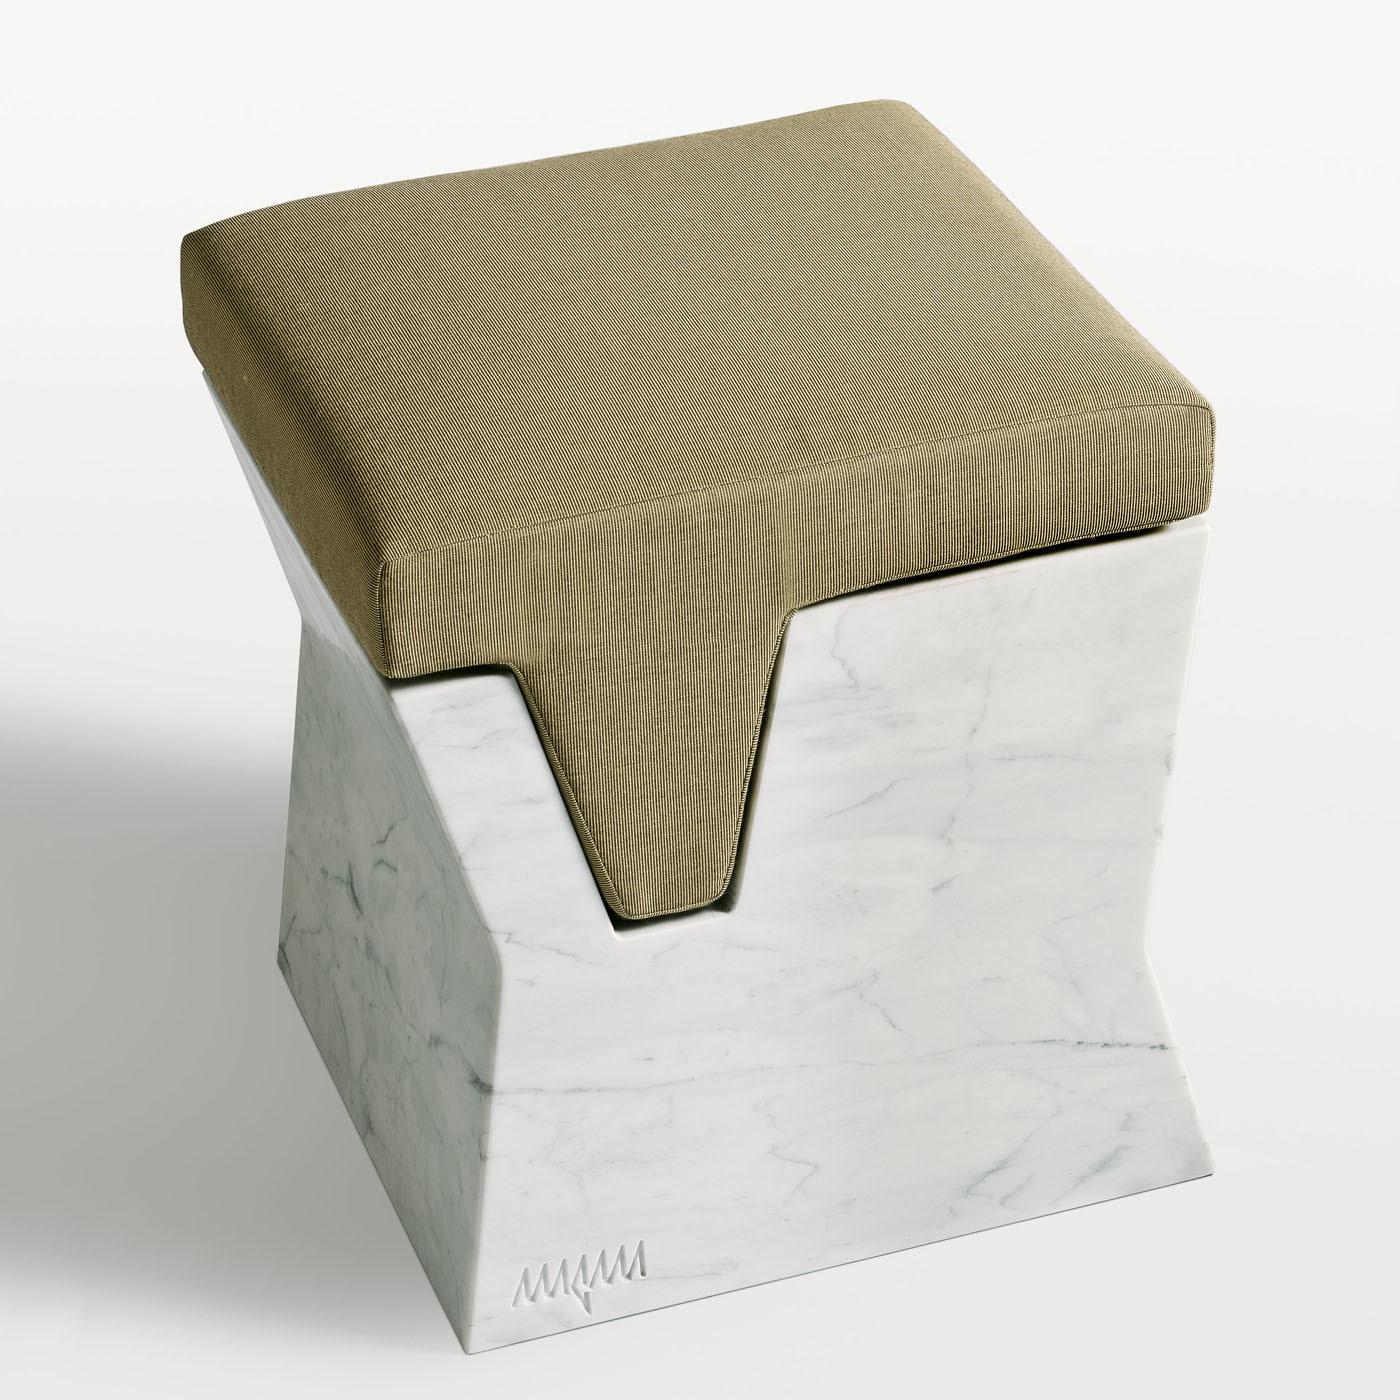 Sophisticated and modern, this striking pouf will add extra seating or a cushioned display surface to a modern living area. Its structure combines the cool and elegant touch of Carrara marble and the plush softness of fabric-upholstered padding.